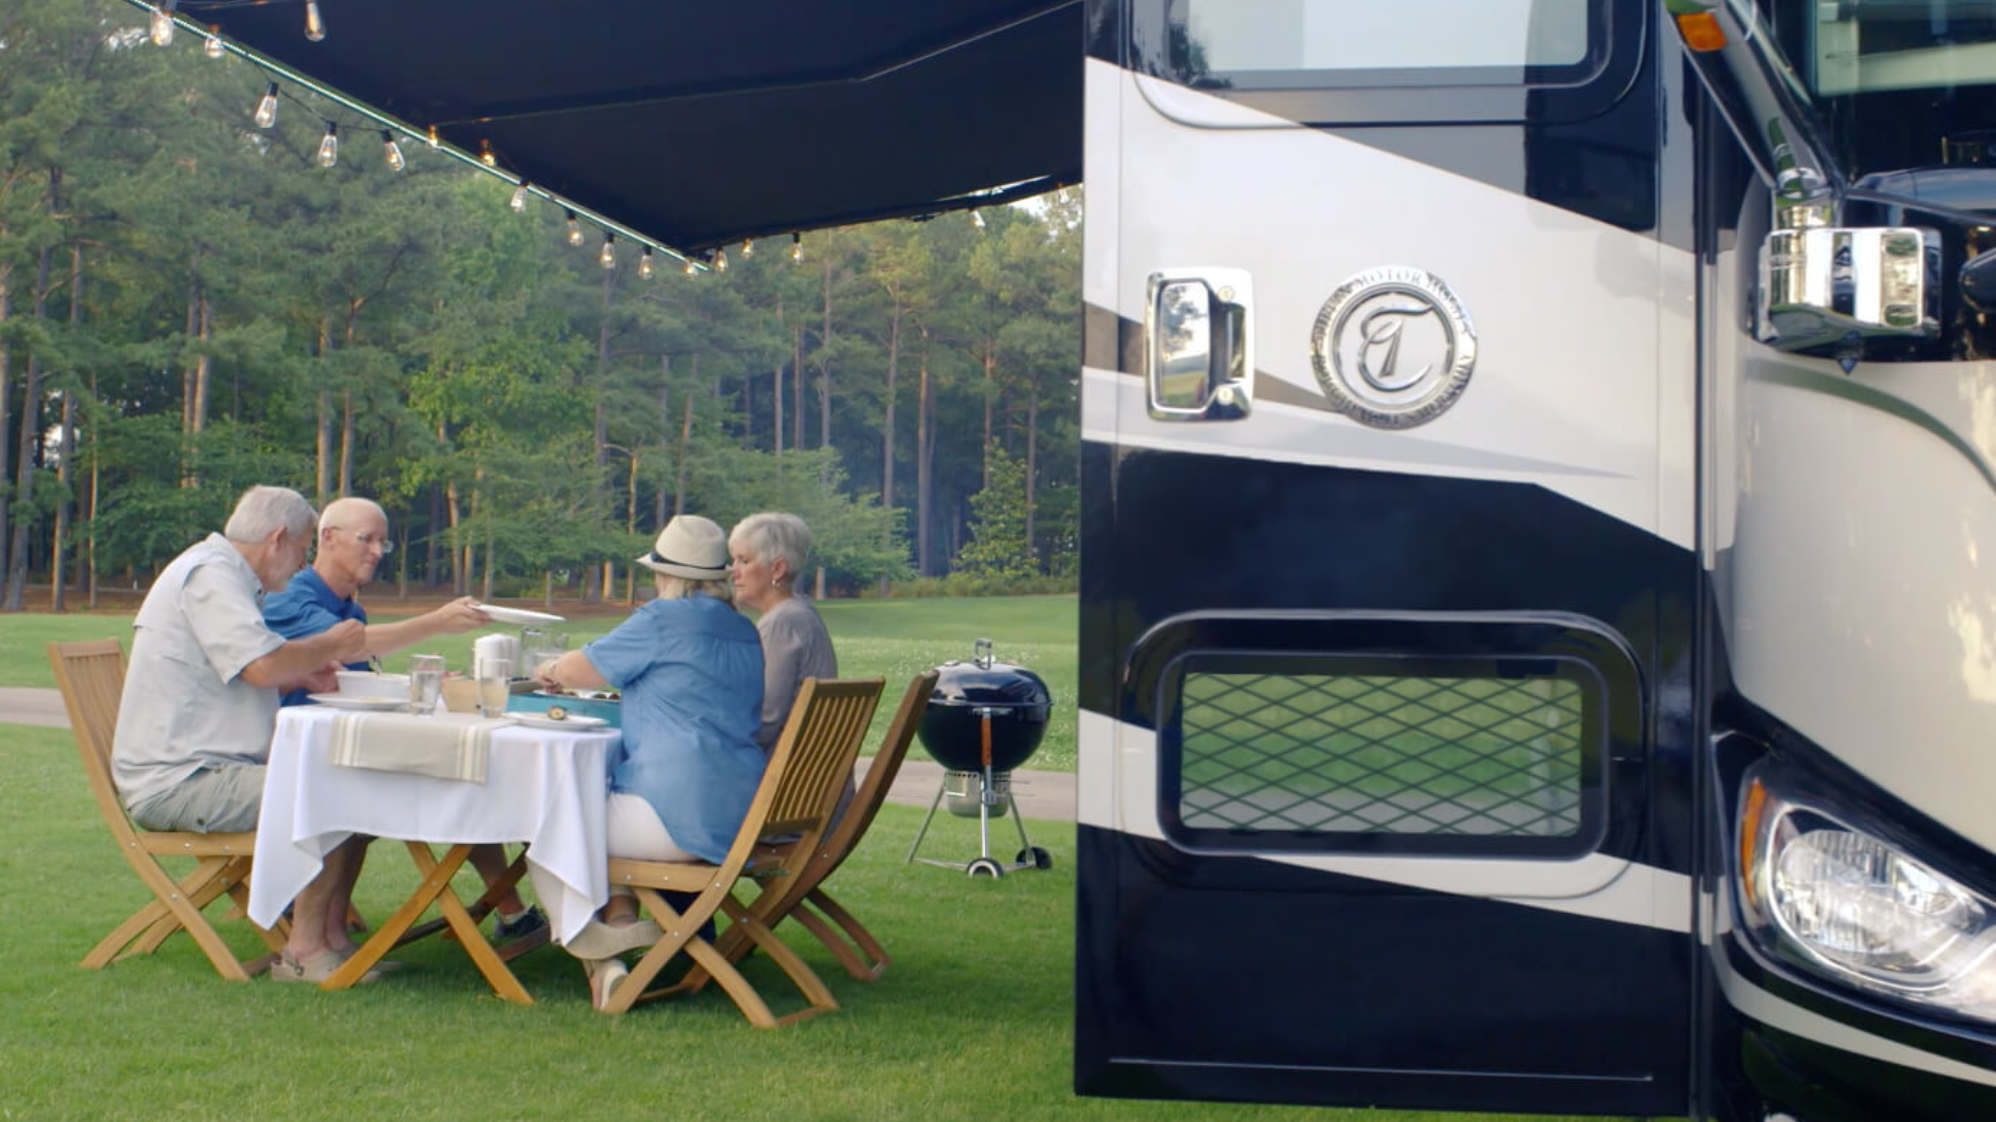 6 Best Aftermarket Grills for Motorhome Cookouts